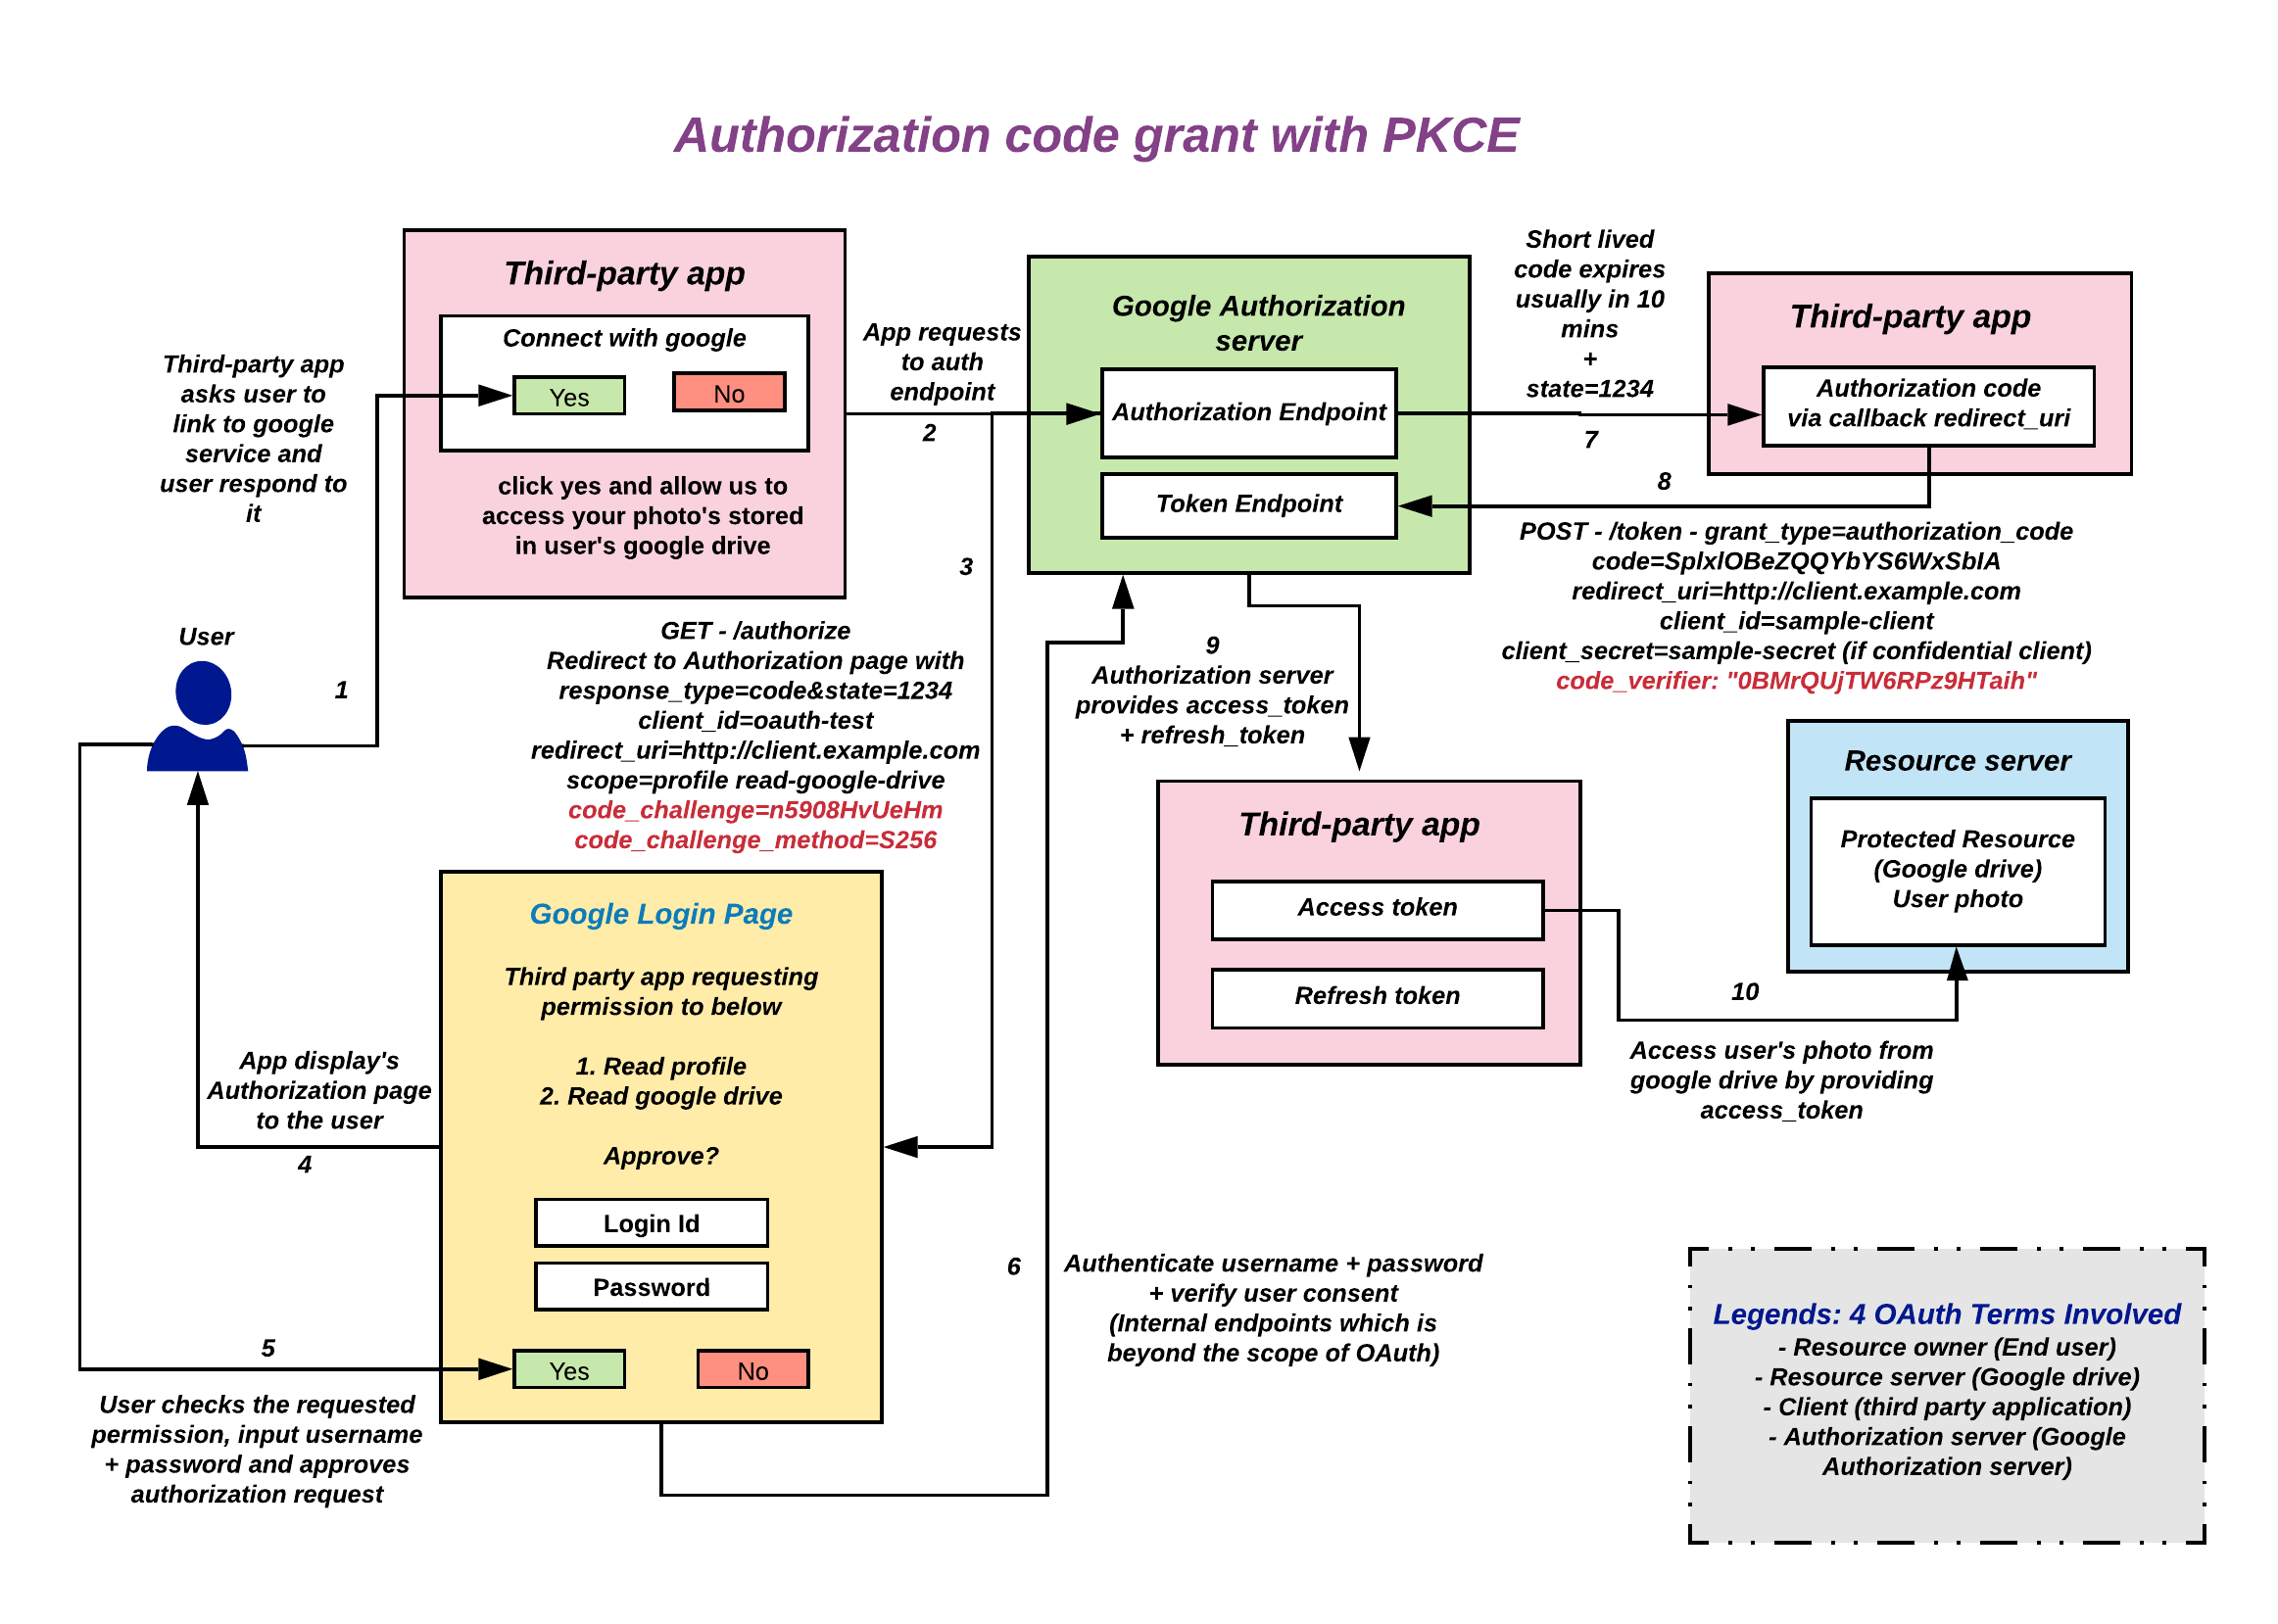 Image of Authorization code grant with PKCE